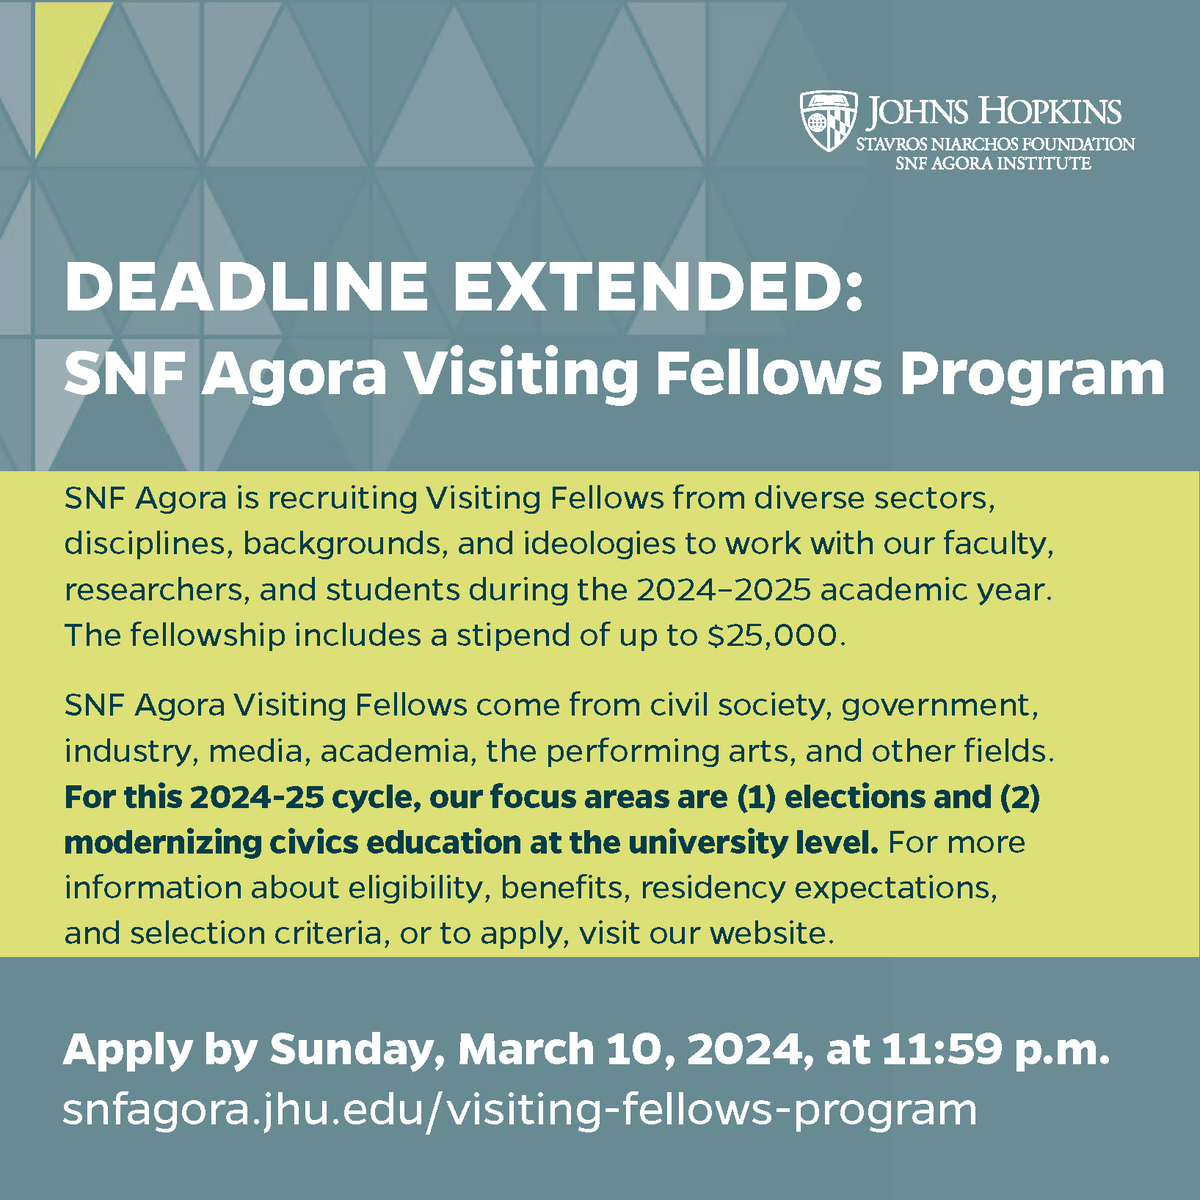 The SNF Agora Institute is now welcoming applications for our 2024-2025 visiting fellows cohort through Sunday, March 10, at 11:59 p.m. Apply here: lnkd.in/egYZbX5Q